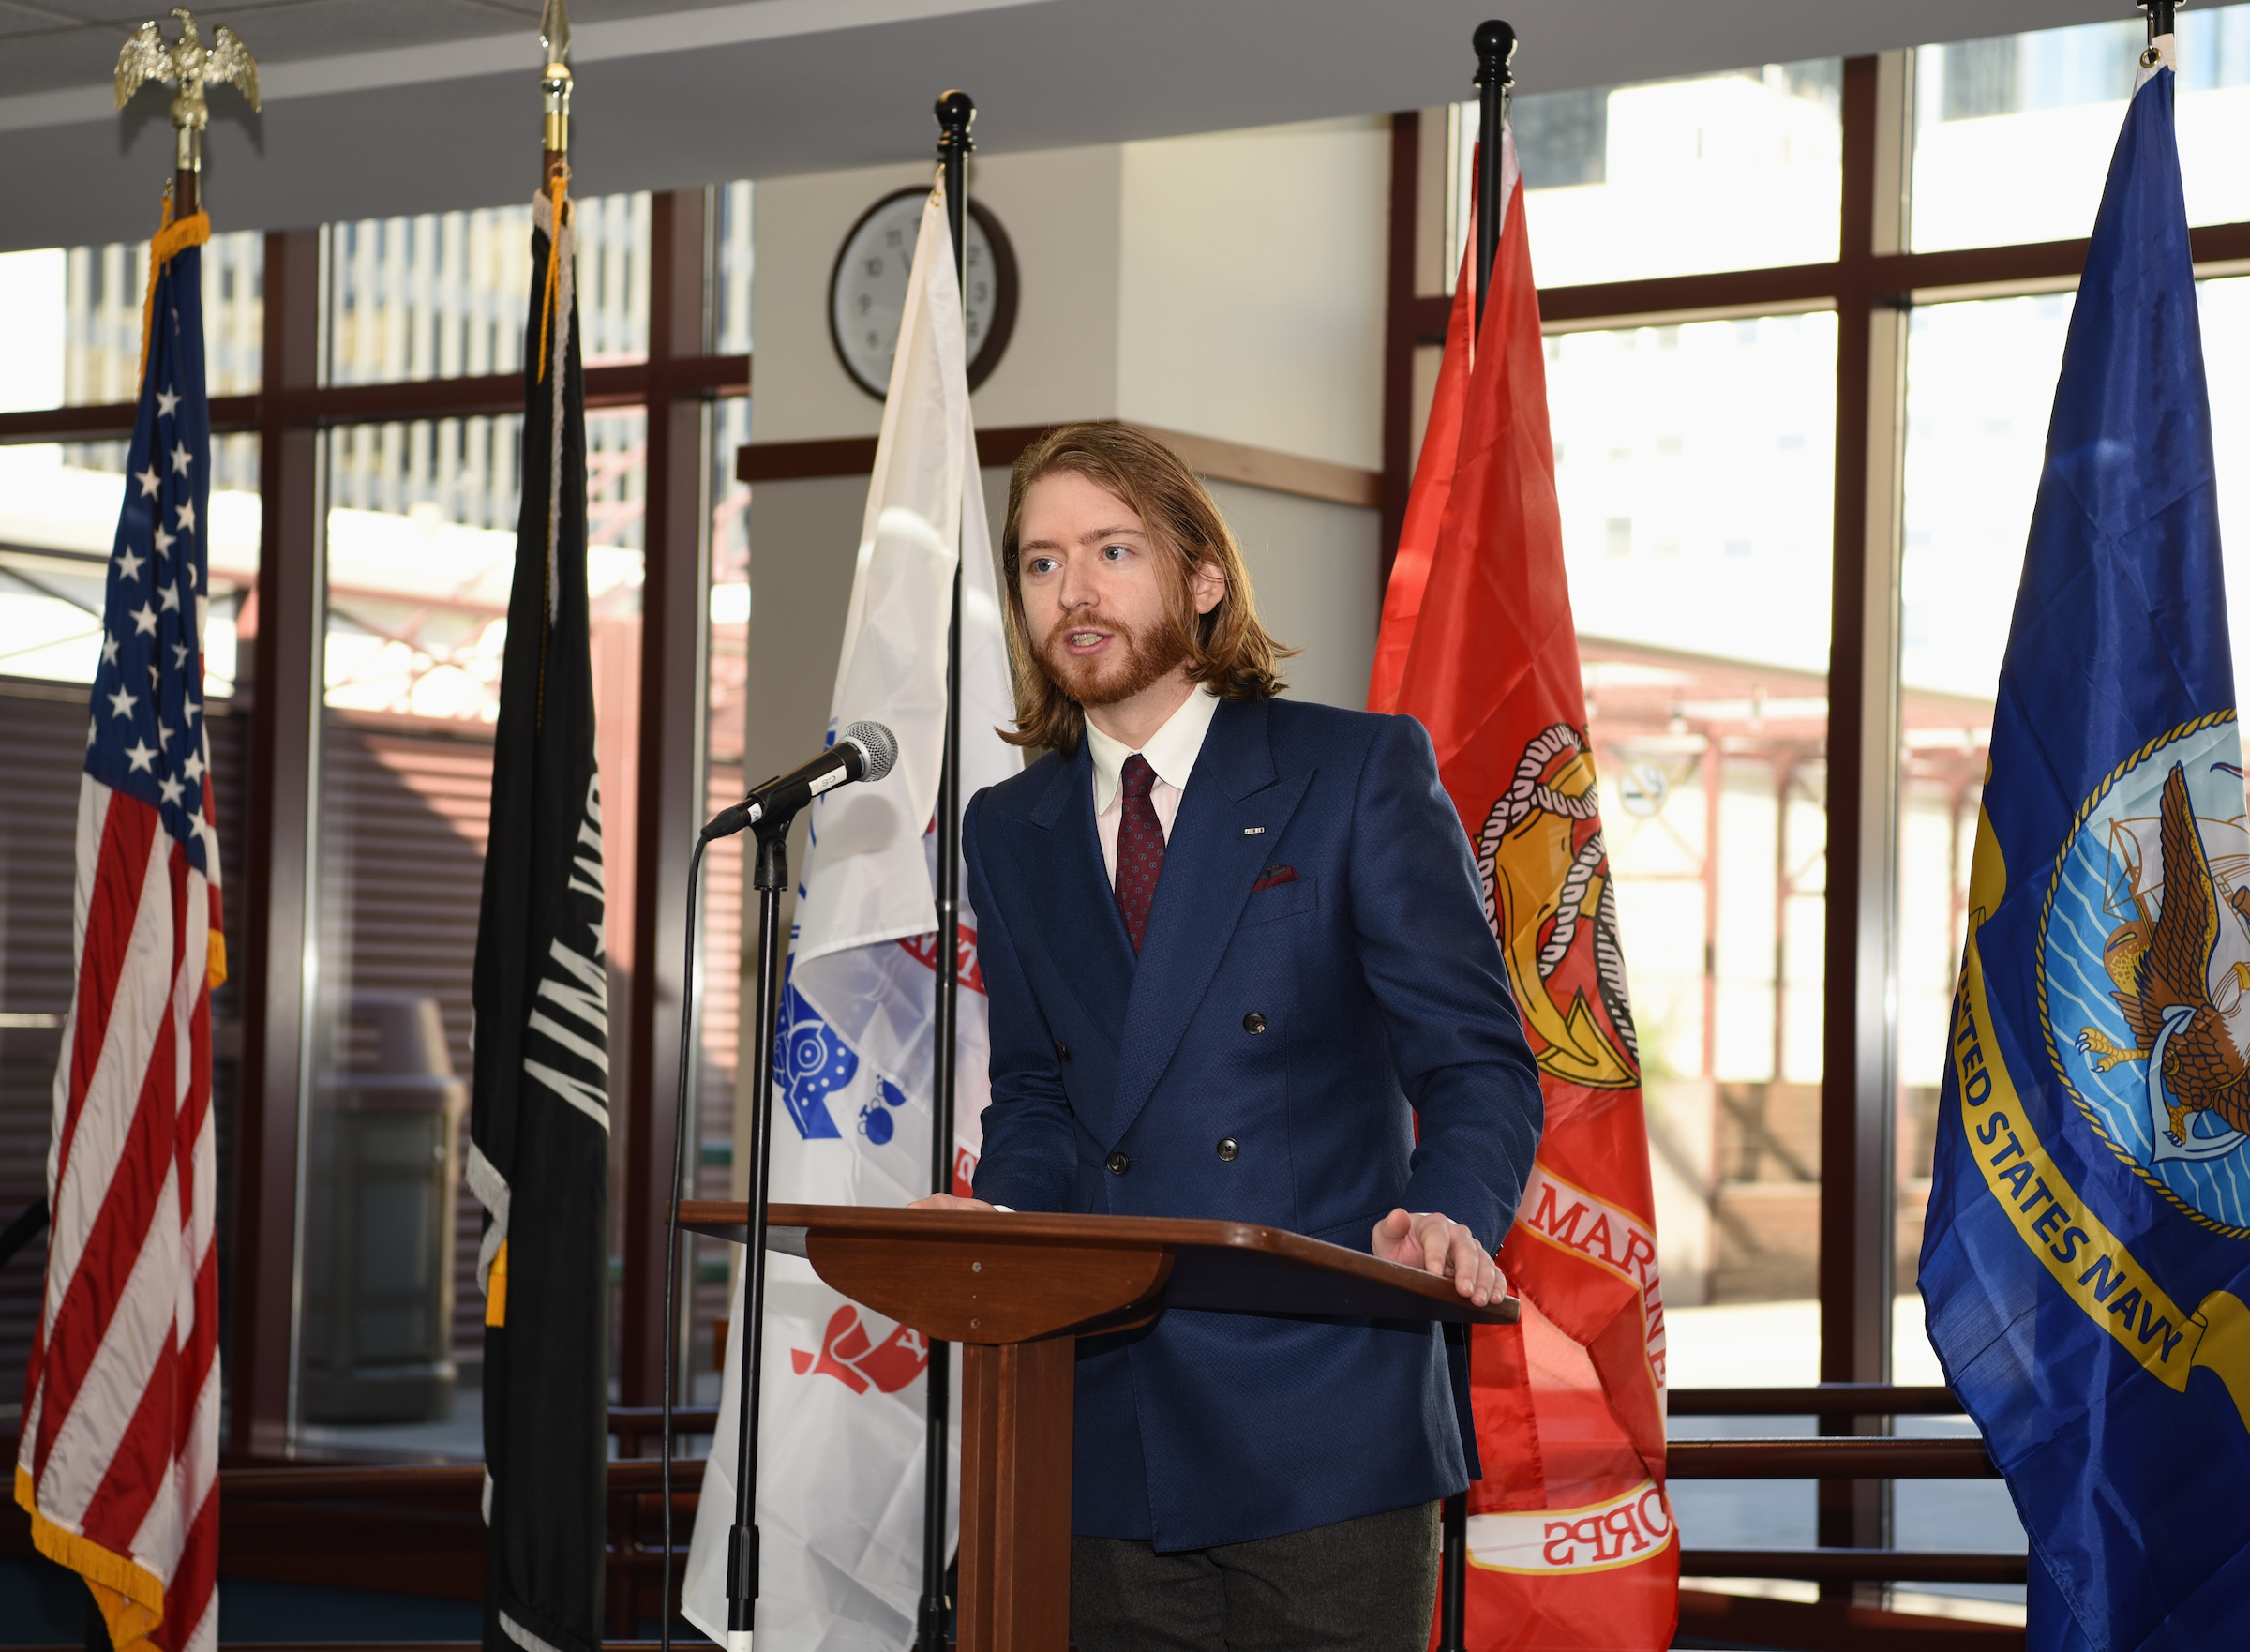 Veteran Liam Turman was among the speakers at the event hosted by the Office of Veteran Affairs. (Photo by Kathy Hillegonds / DePaul University)